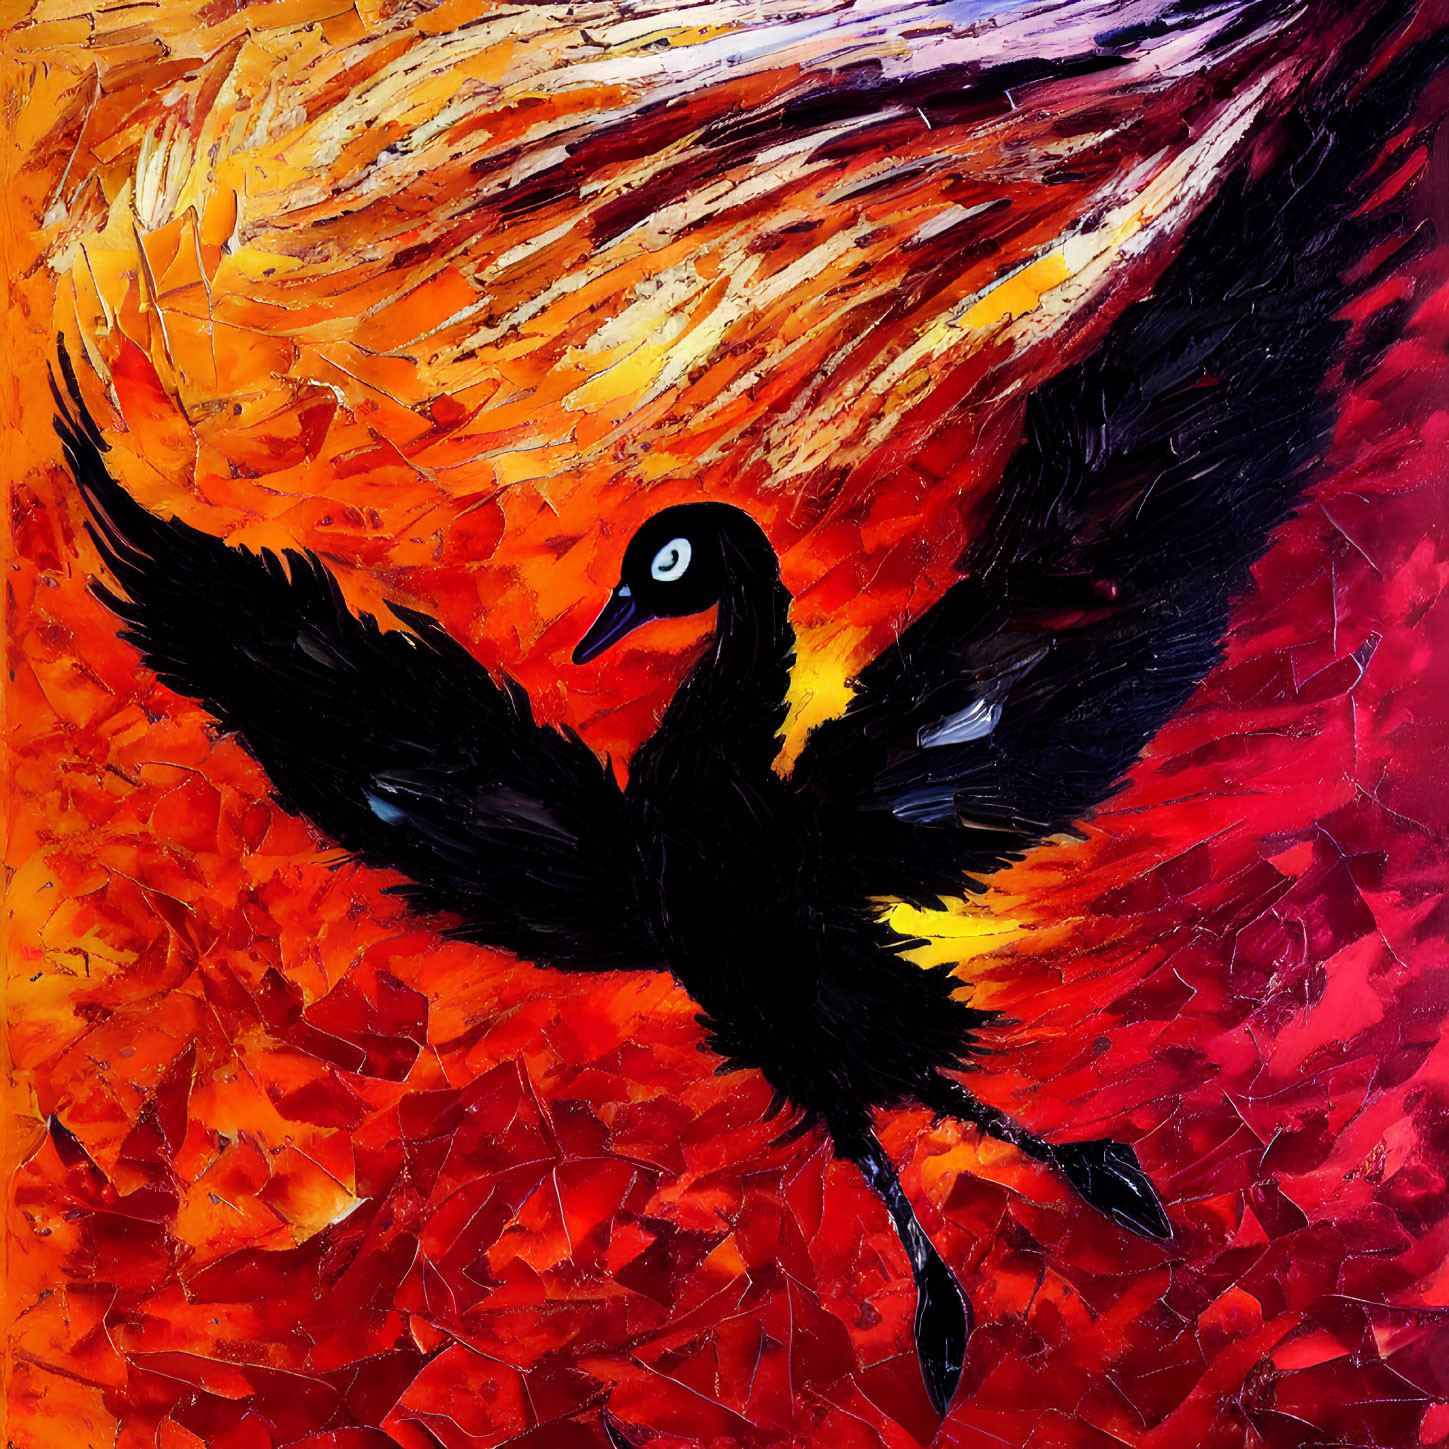 Colorful Abstract Painting: Black Bird in Flight with Red and Orange Textured Background